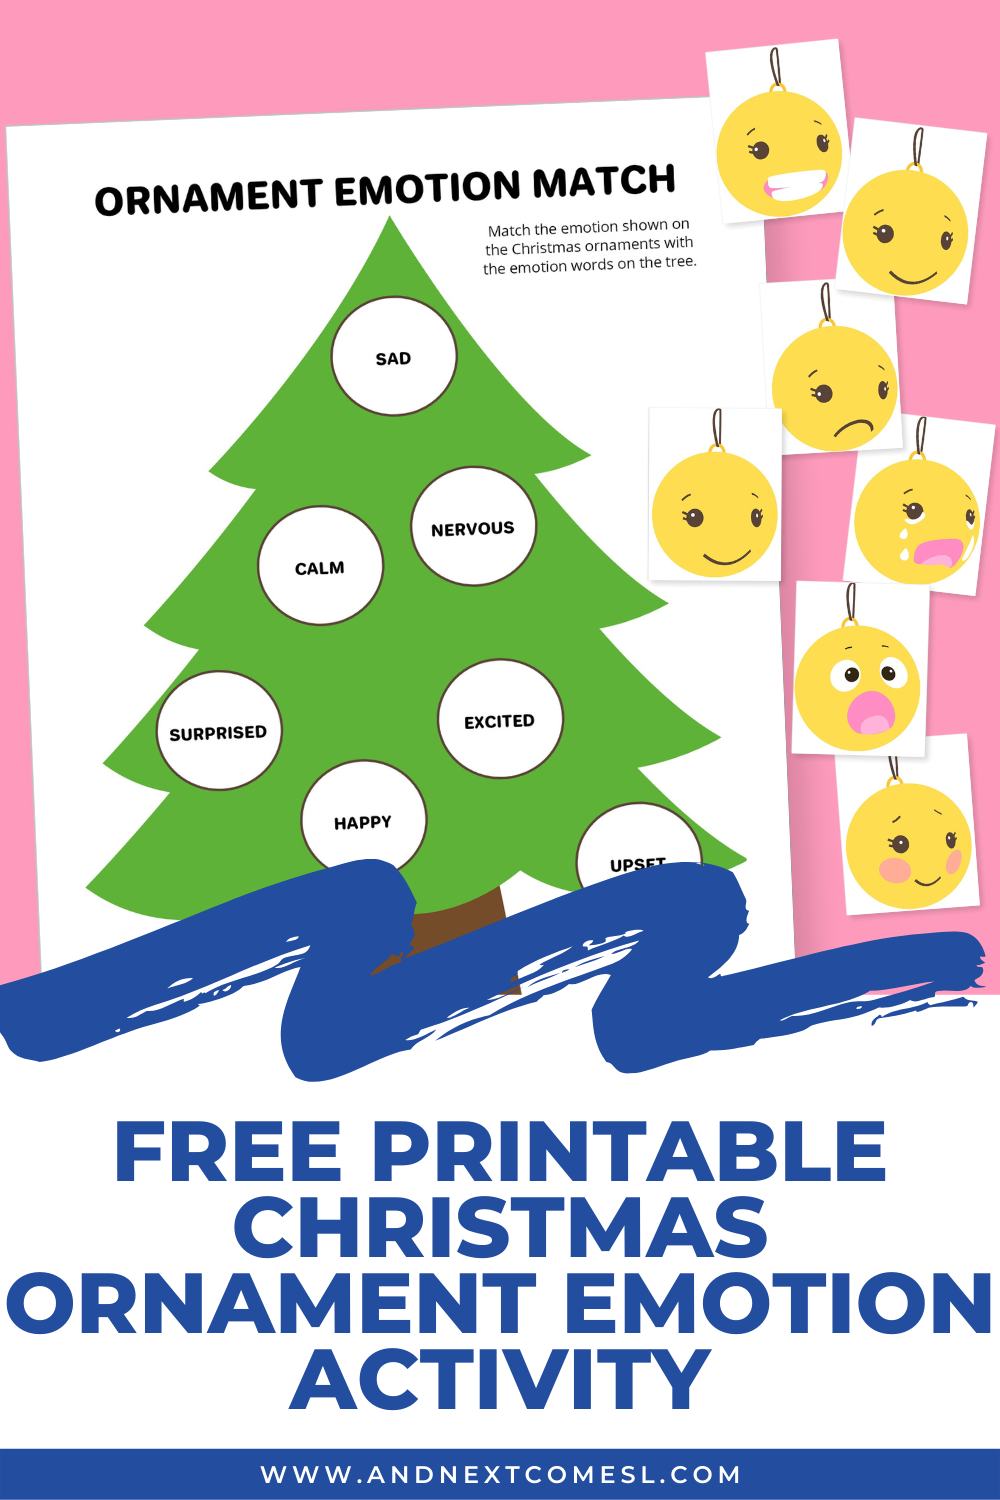 Free printable Christmas ornament emotion activity for kids